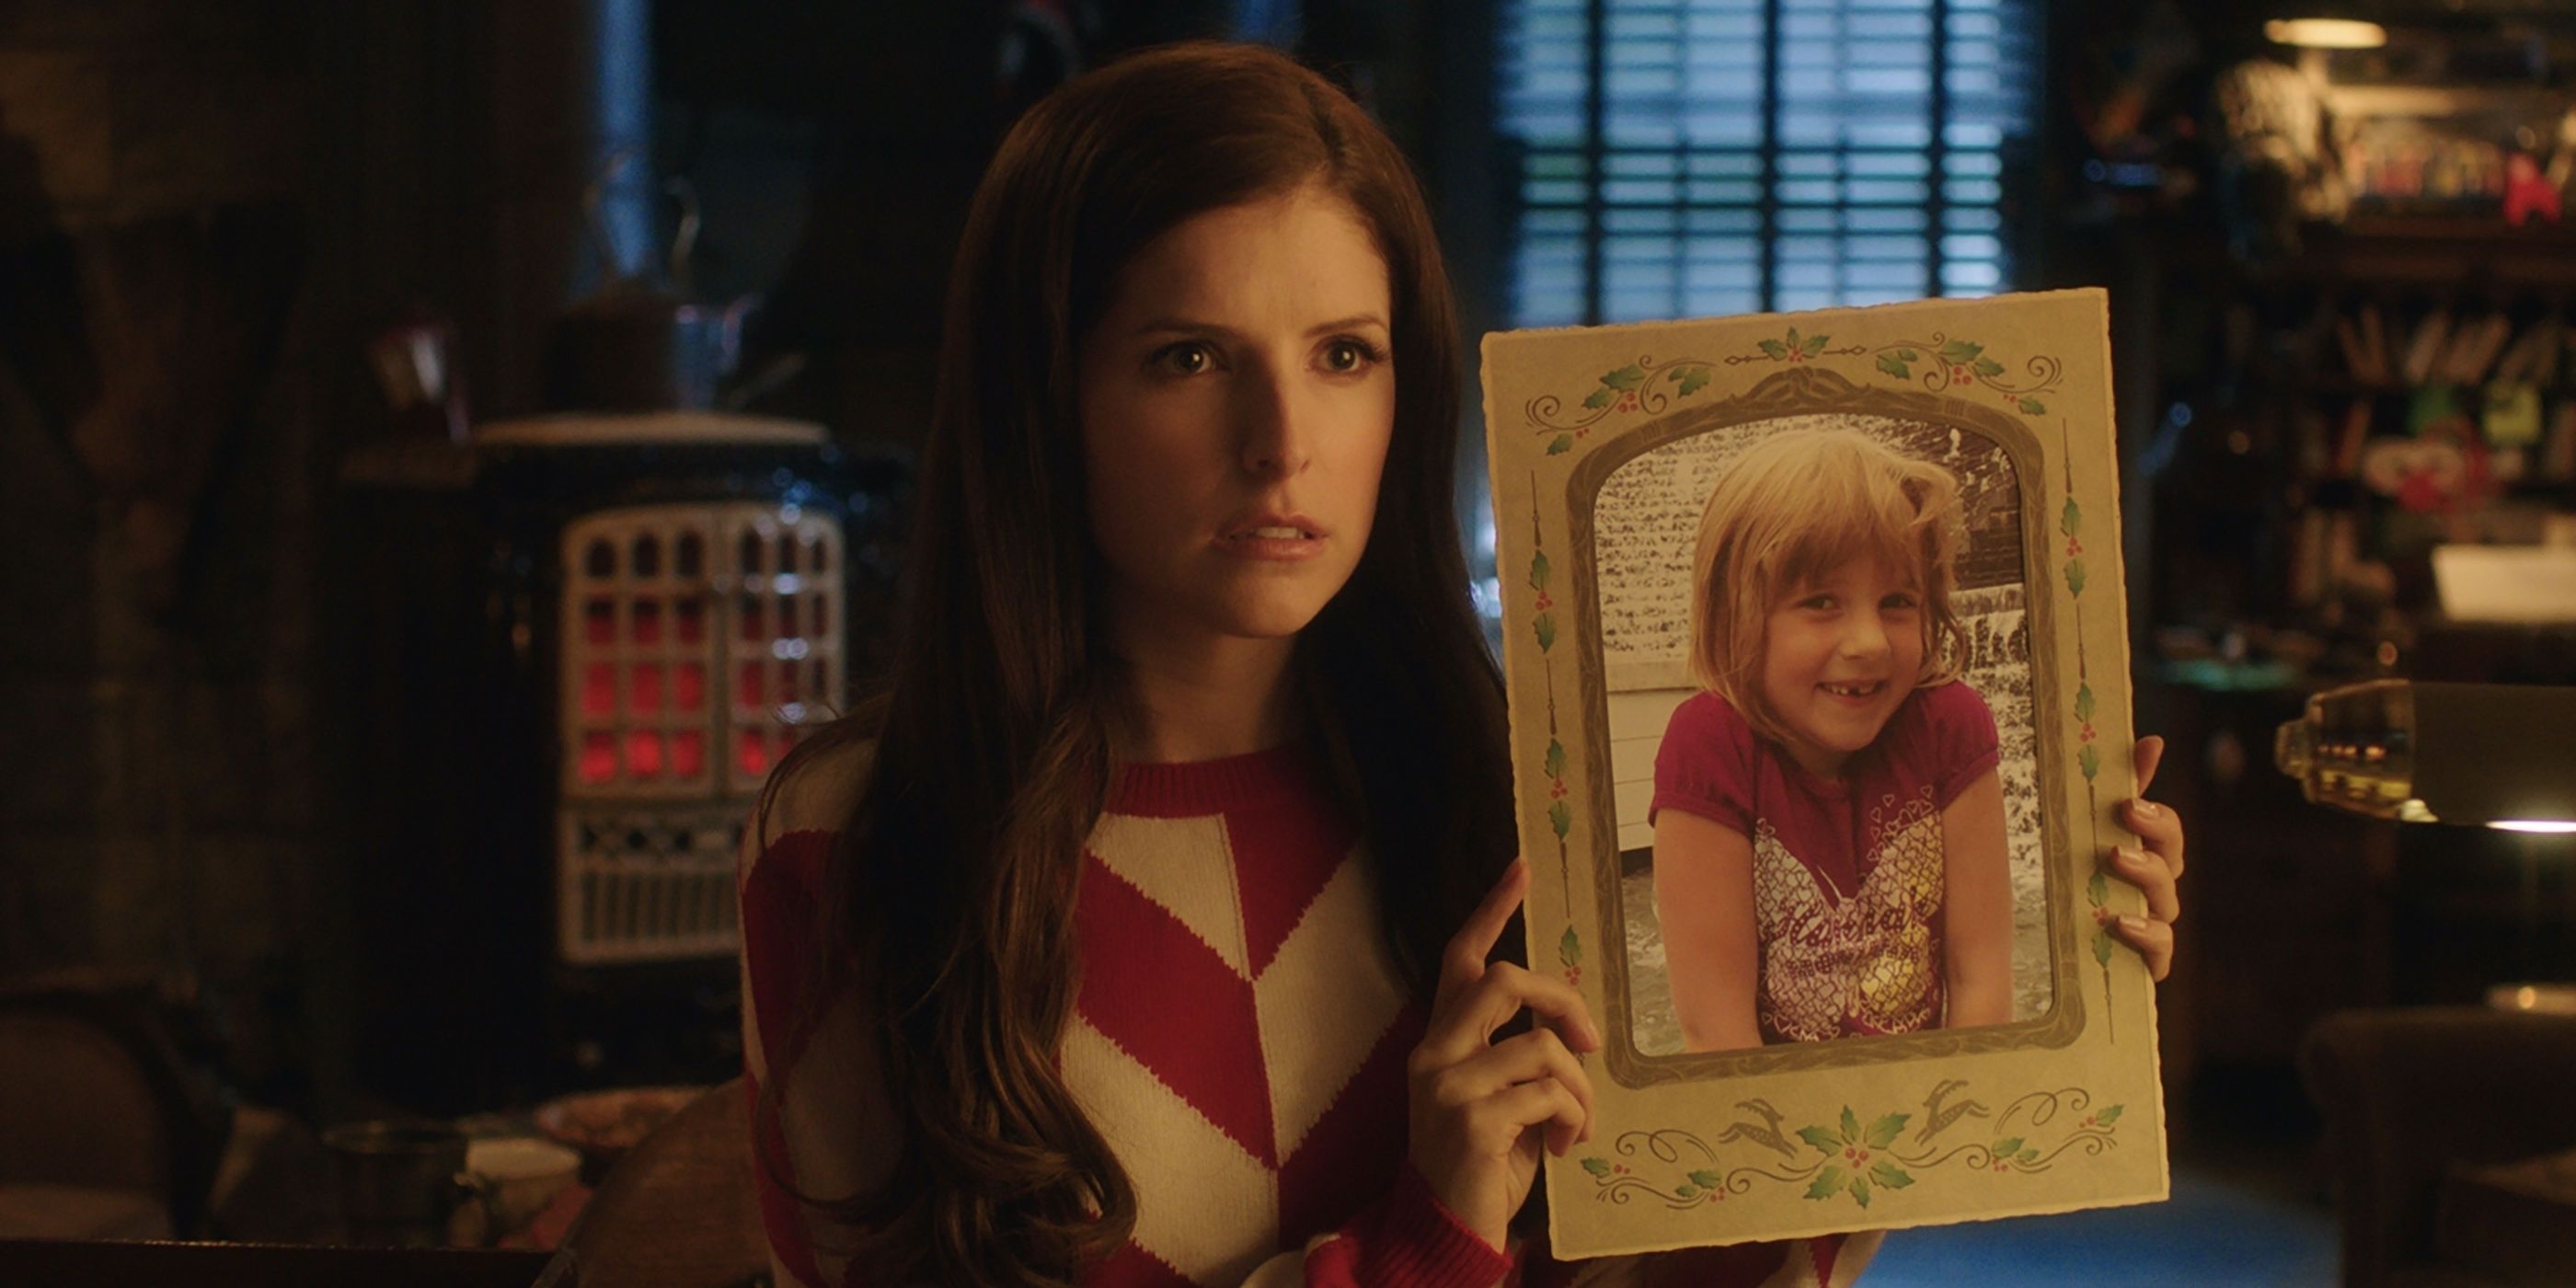 Anna Kendrick in Noelle holding up a picture of a young girl